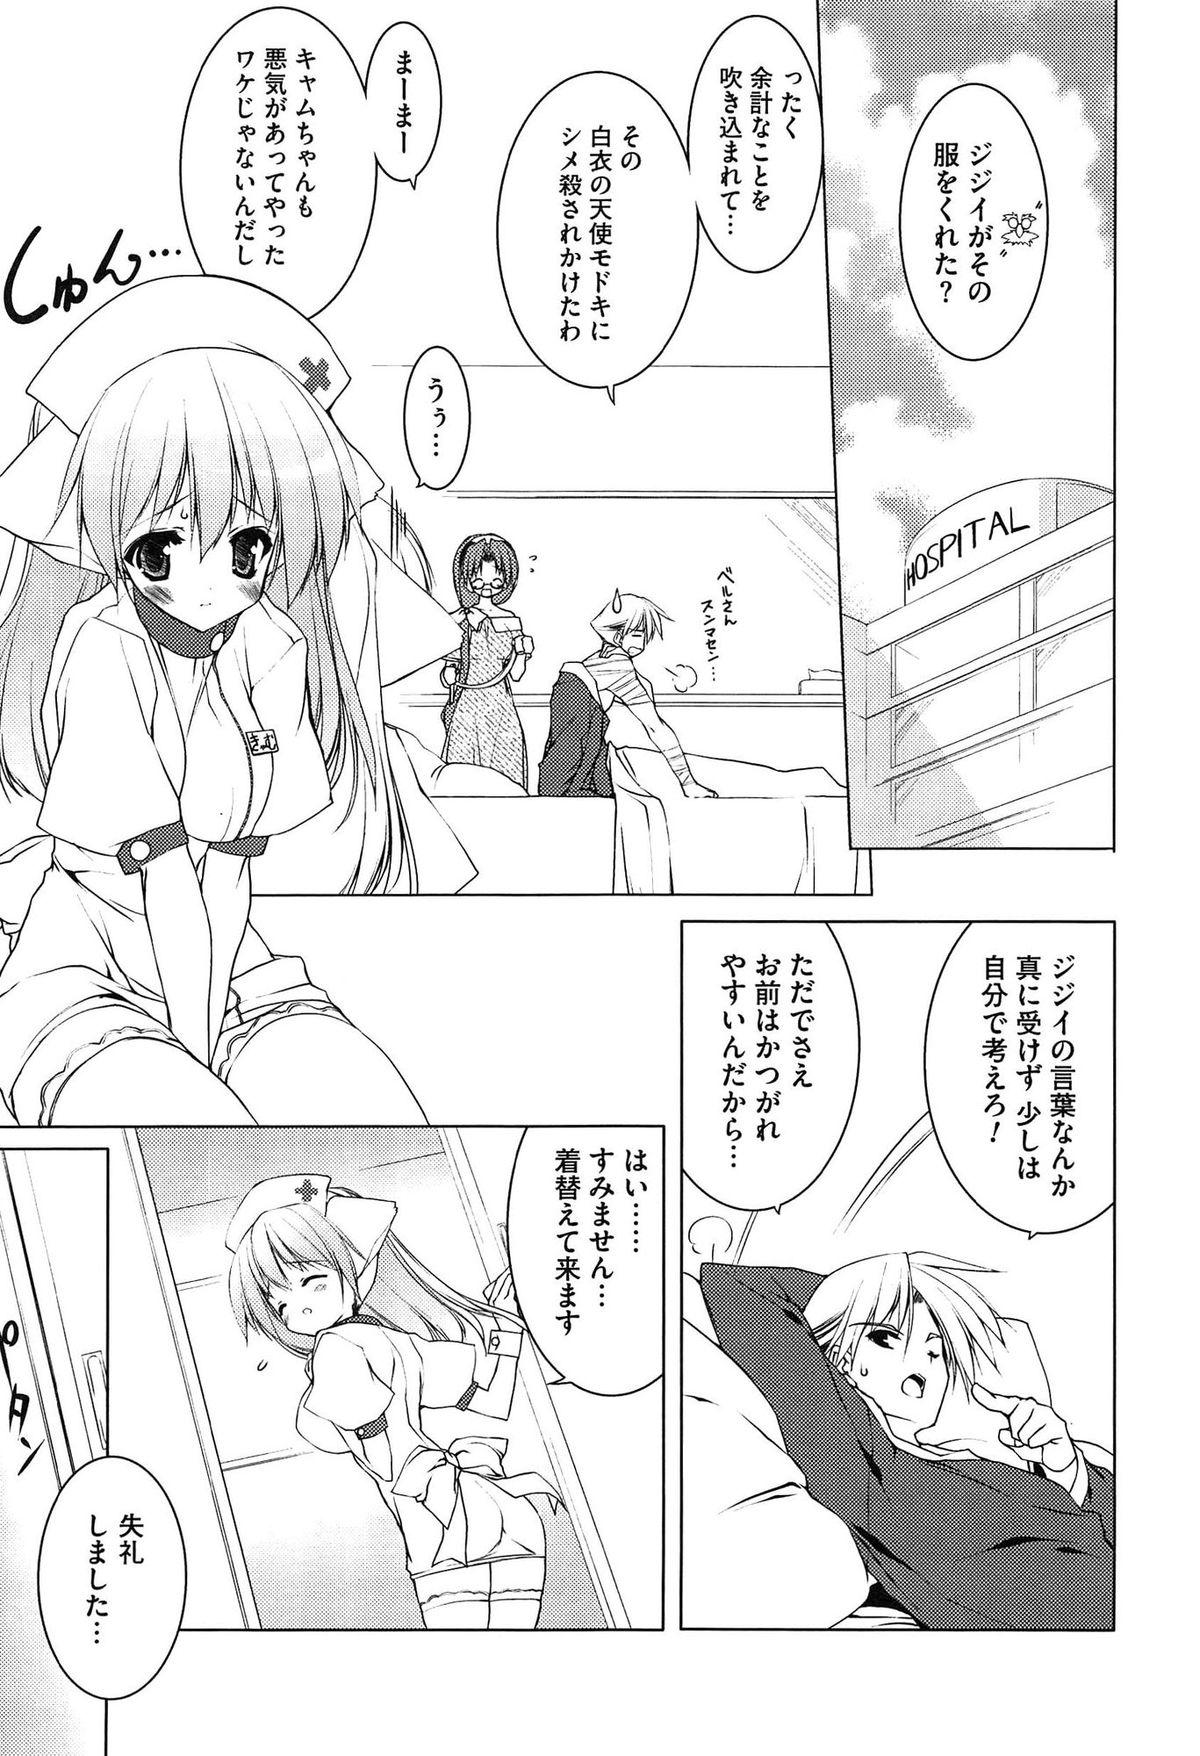 Little Newmanoid CAM Vol. 2 Shokai Genteiban Reversecowgirl - Page 11